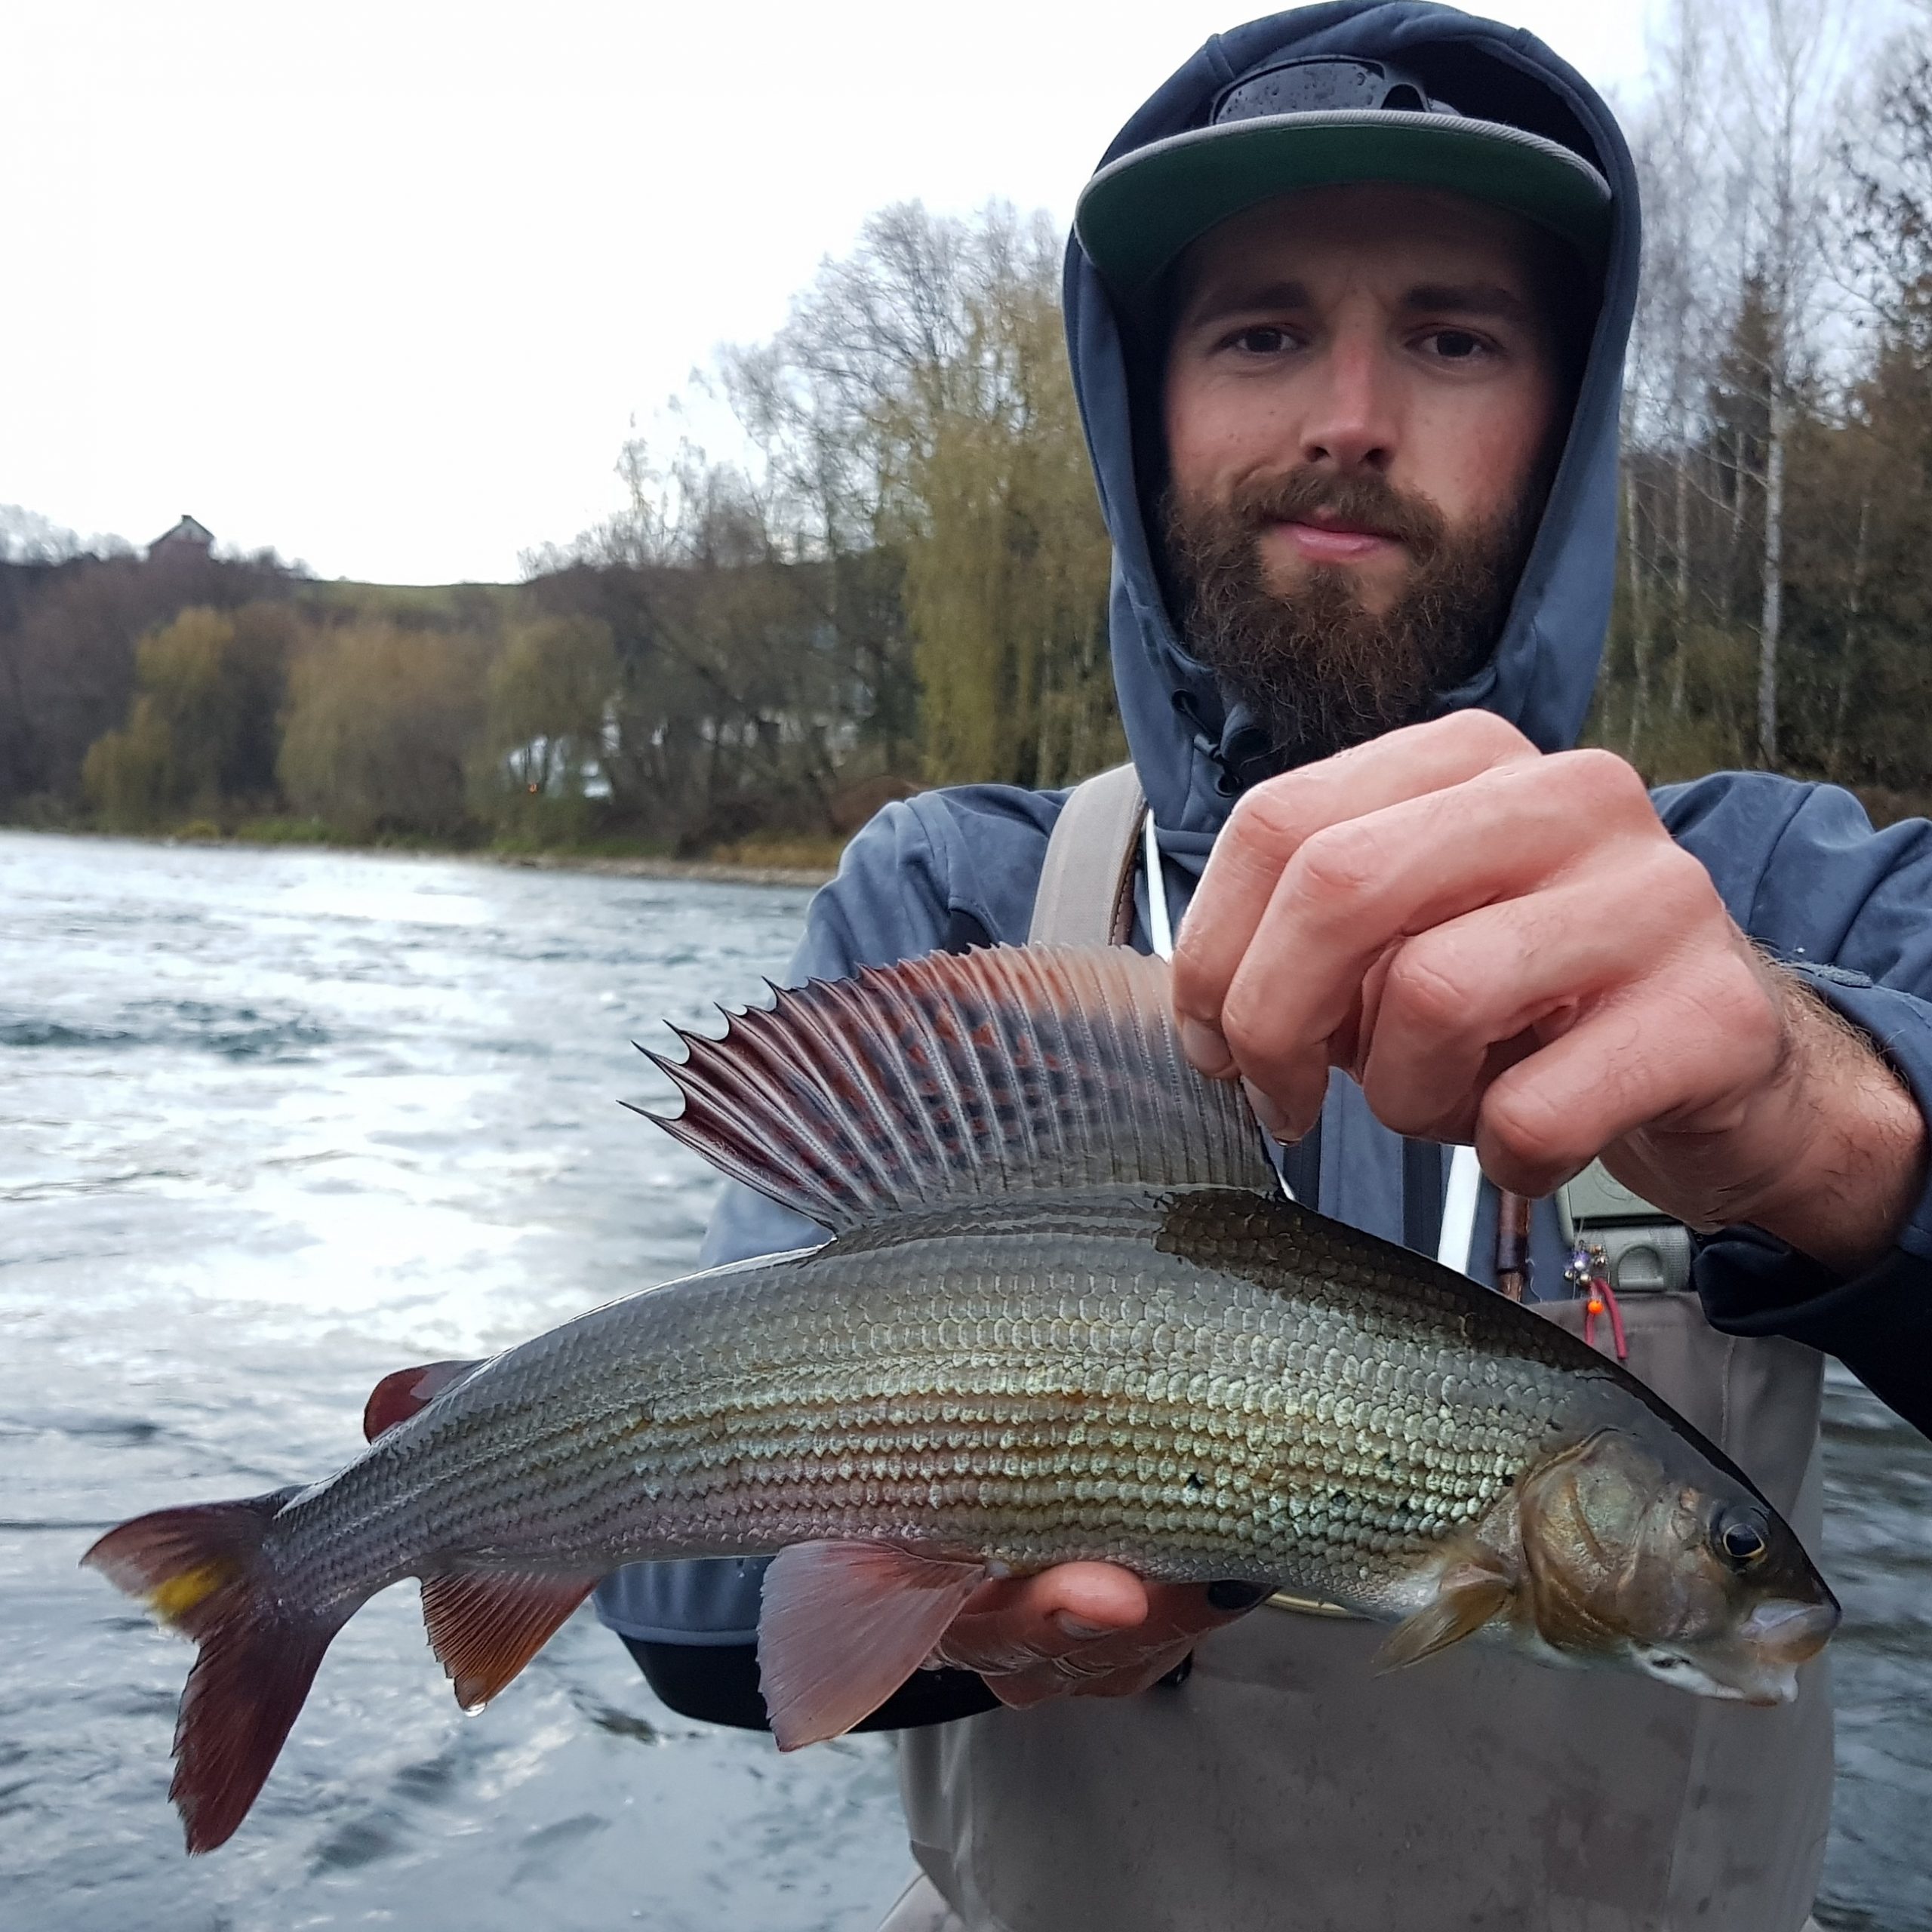 Another nice grayling (not from San River) from Dunajec River